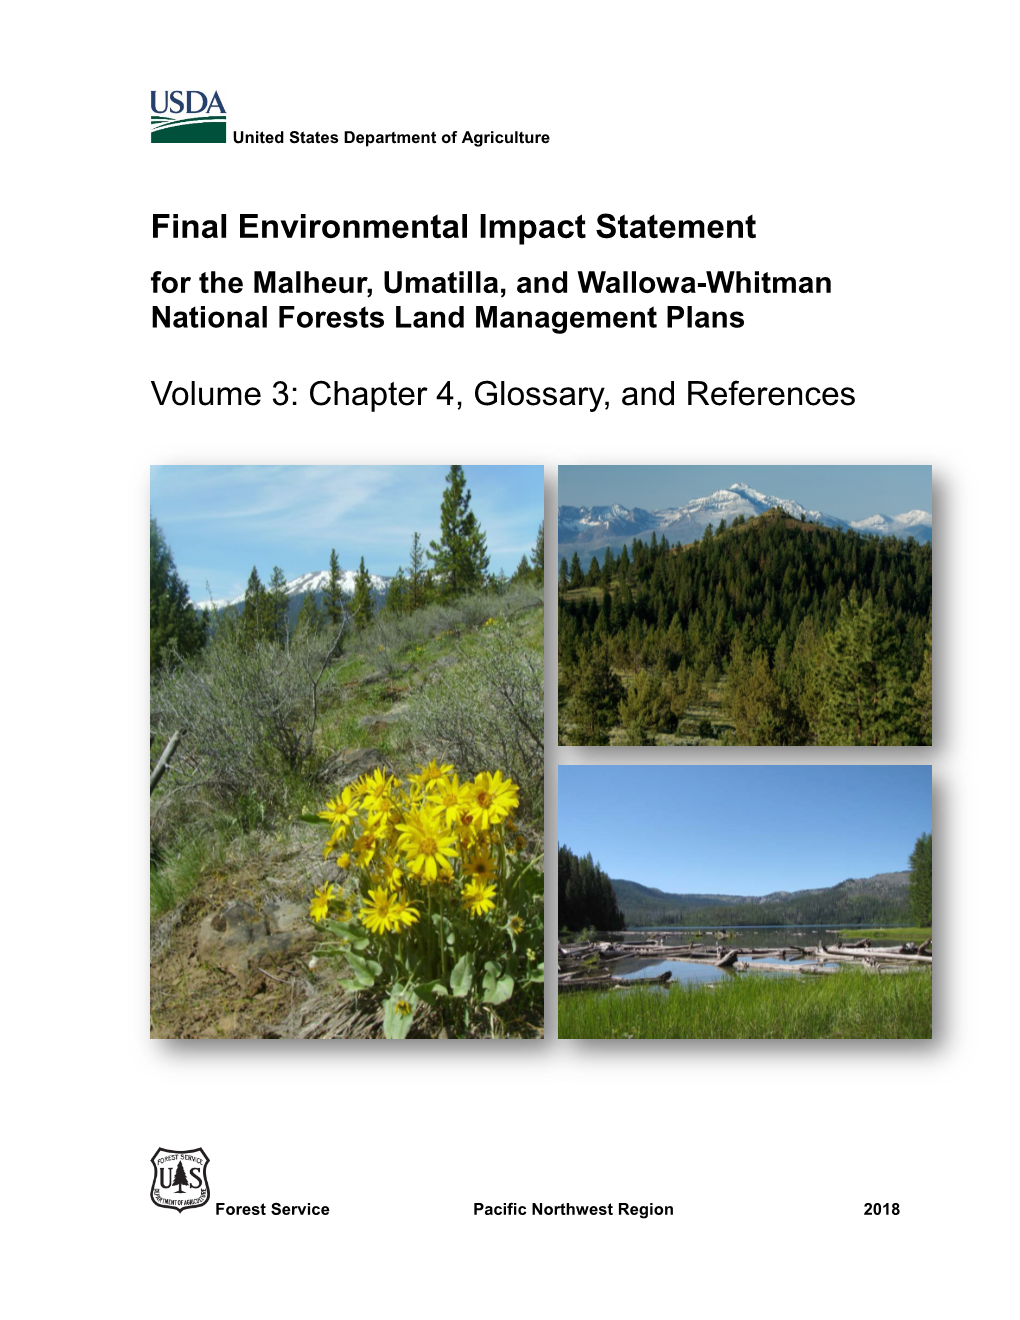 For the Malheur, Umatilla, and Wallowa-Whitman National Forests Land Management Plans